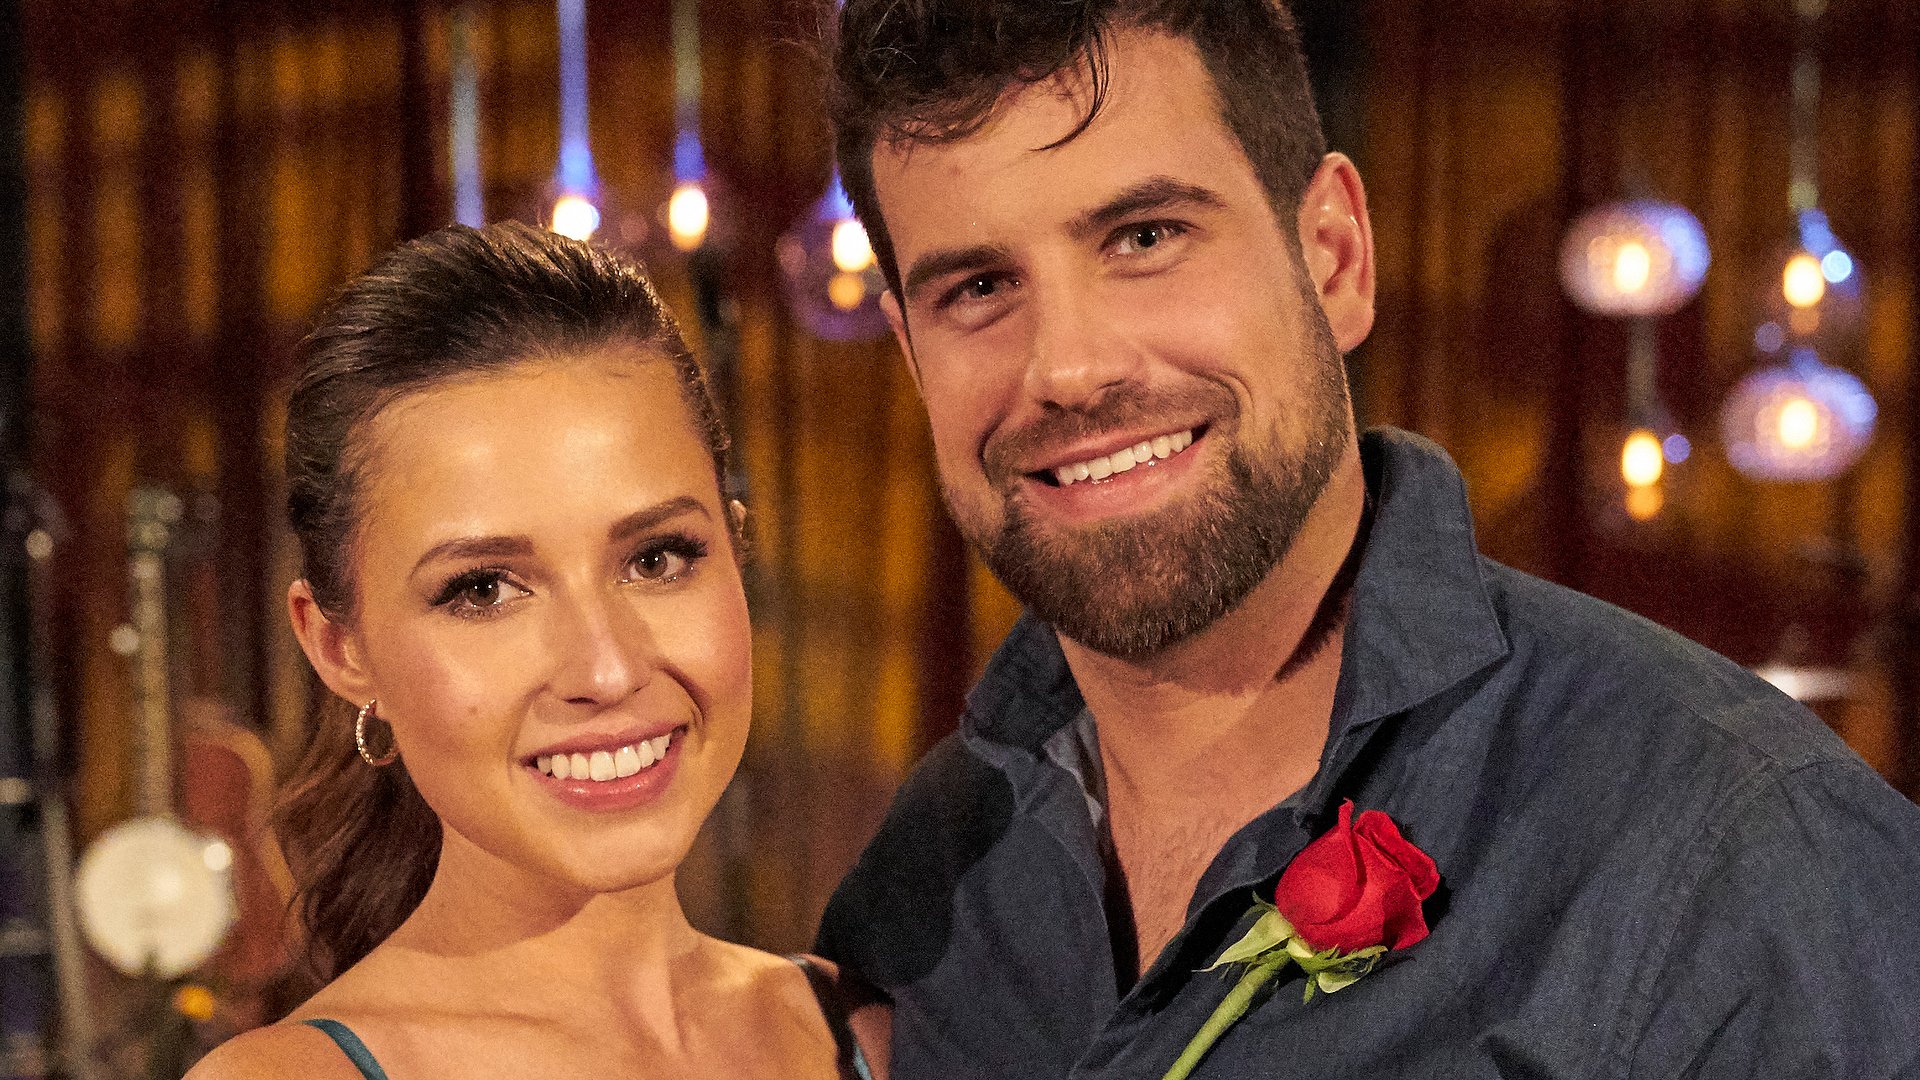 Katie Thurston and Blake Moynes pose together on their date in ‘The Bachelorette’ Season 17 Week 5